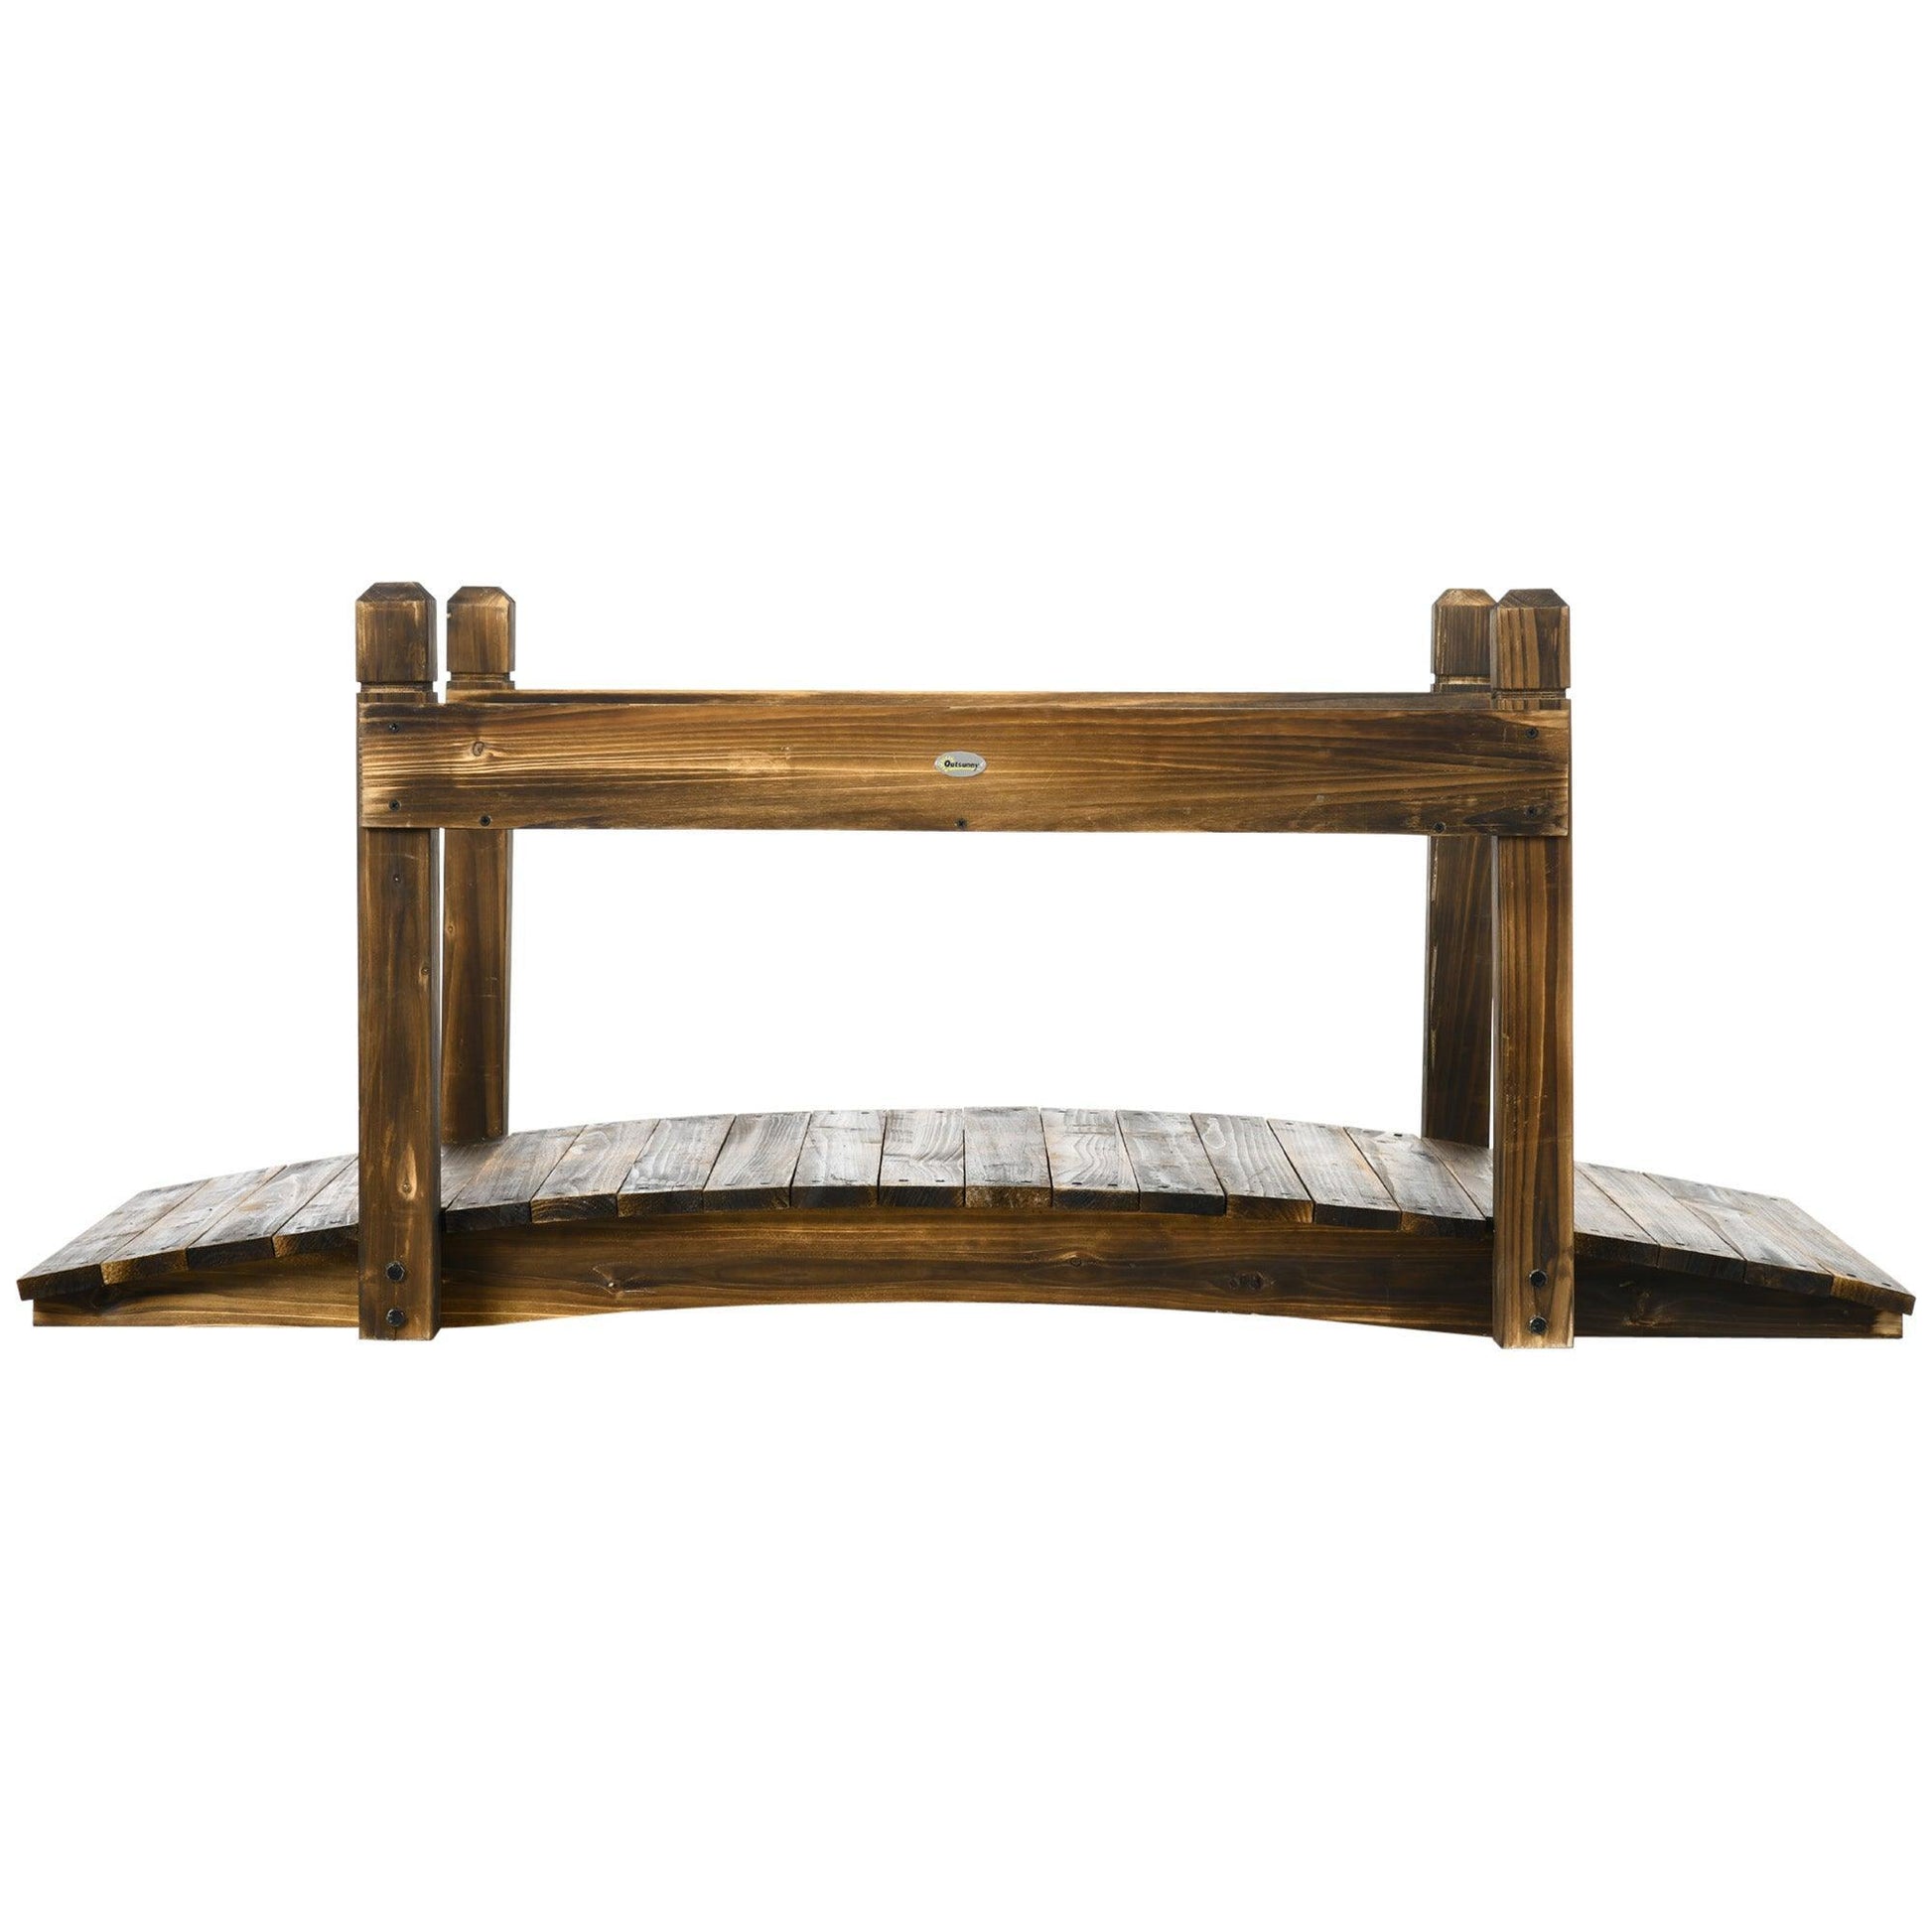 Outsunny Wooden Garden Bridge with Planters for Pond or Stream - ALL4U RETAILER LTD